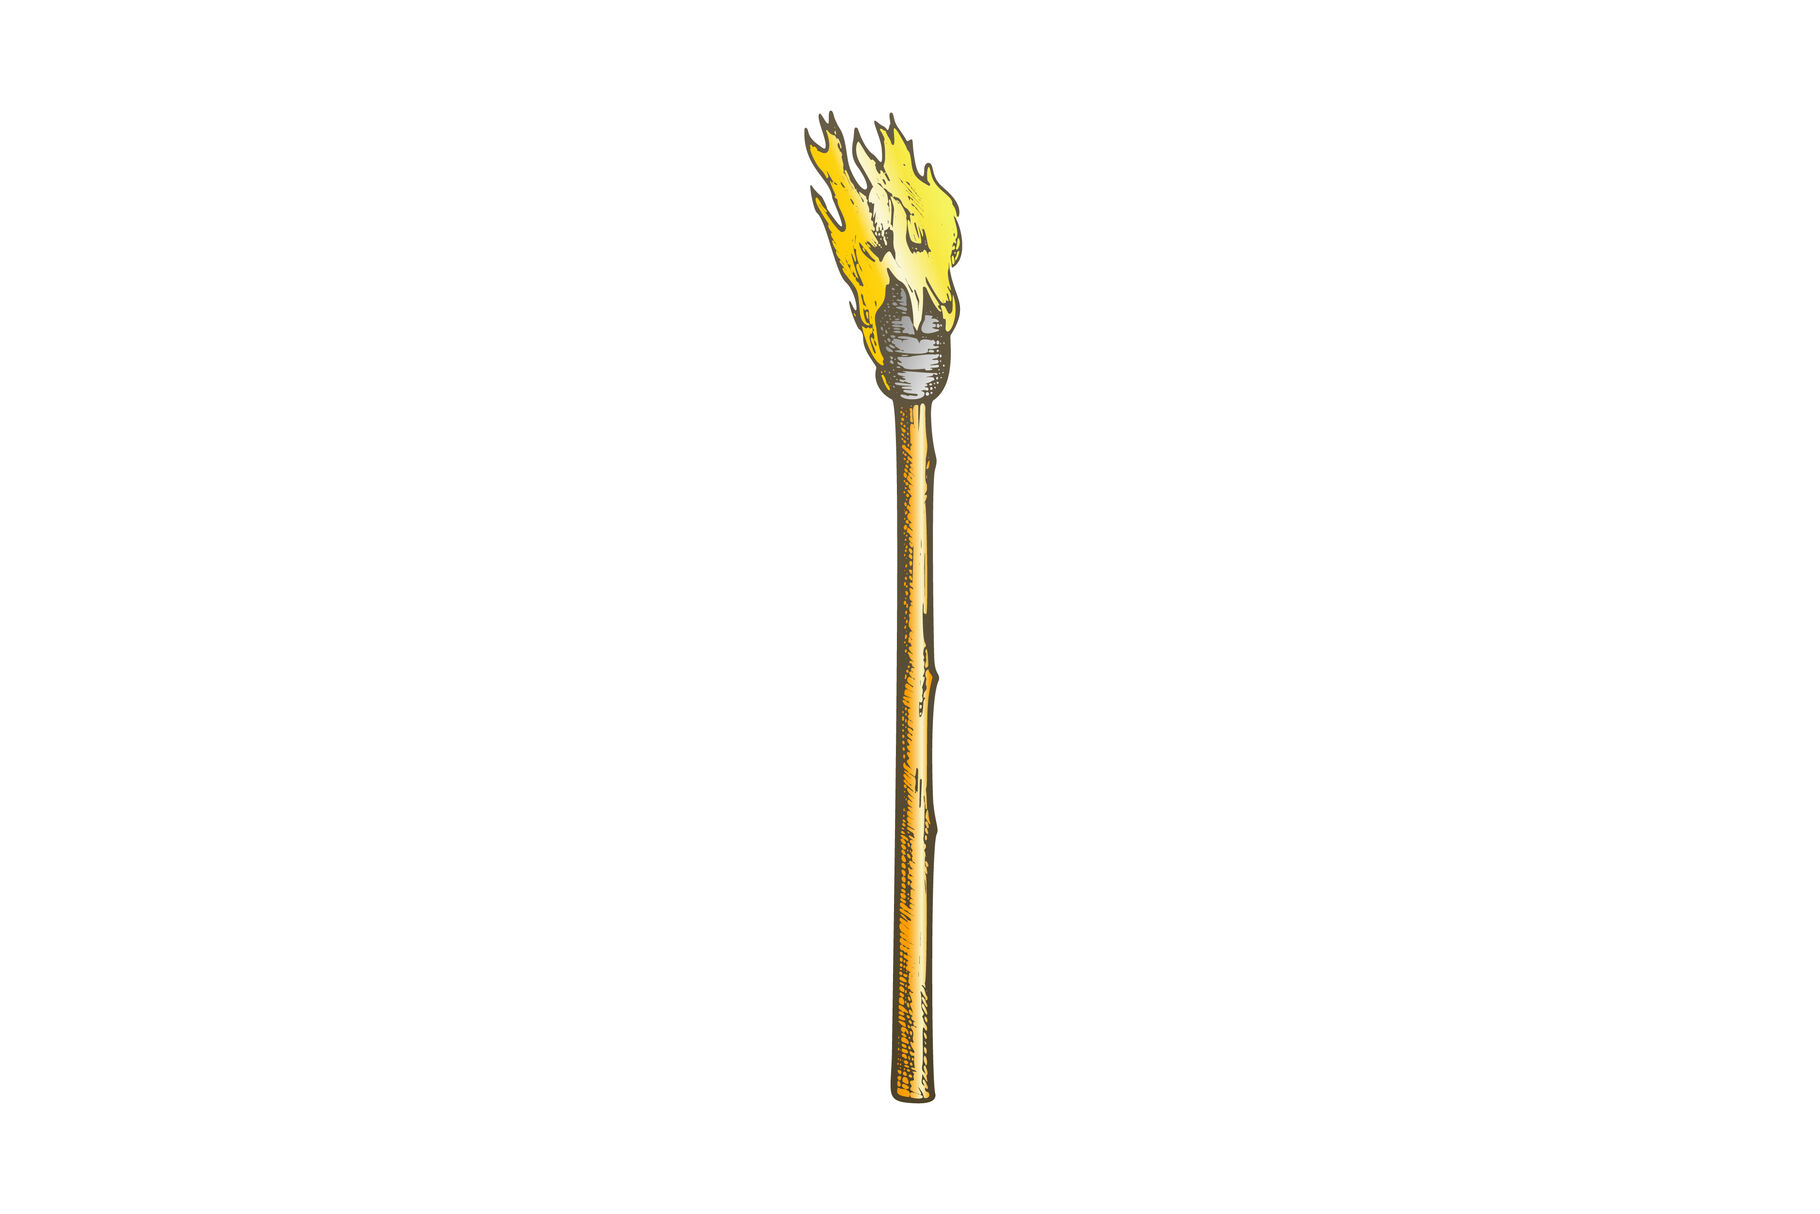 wood torch clipart